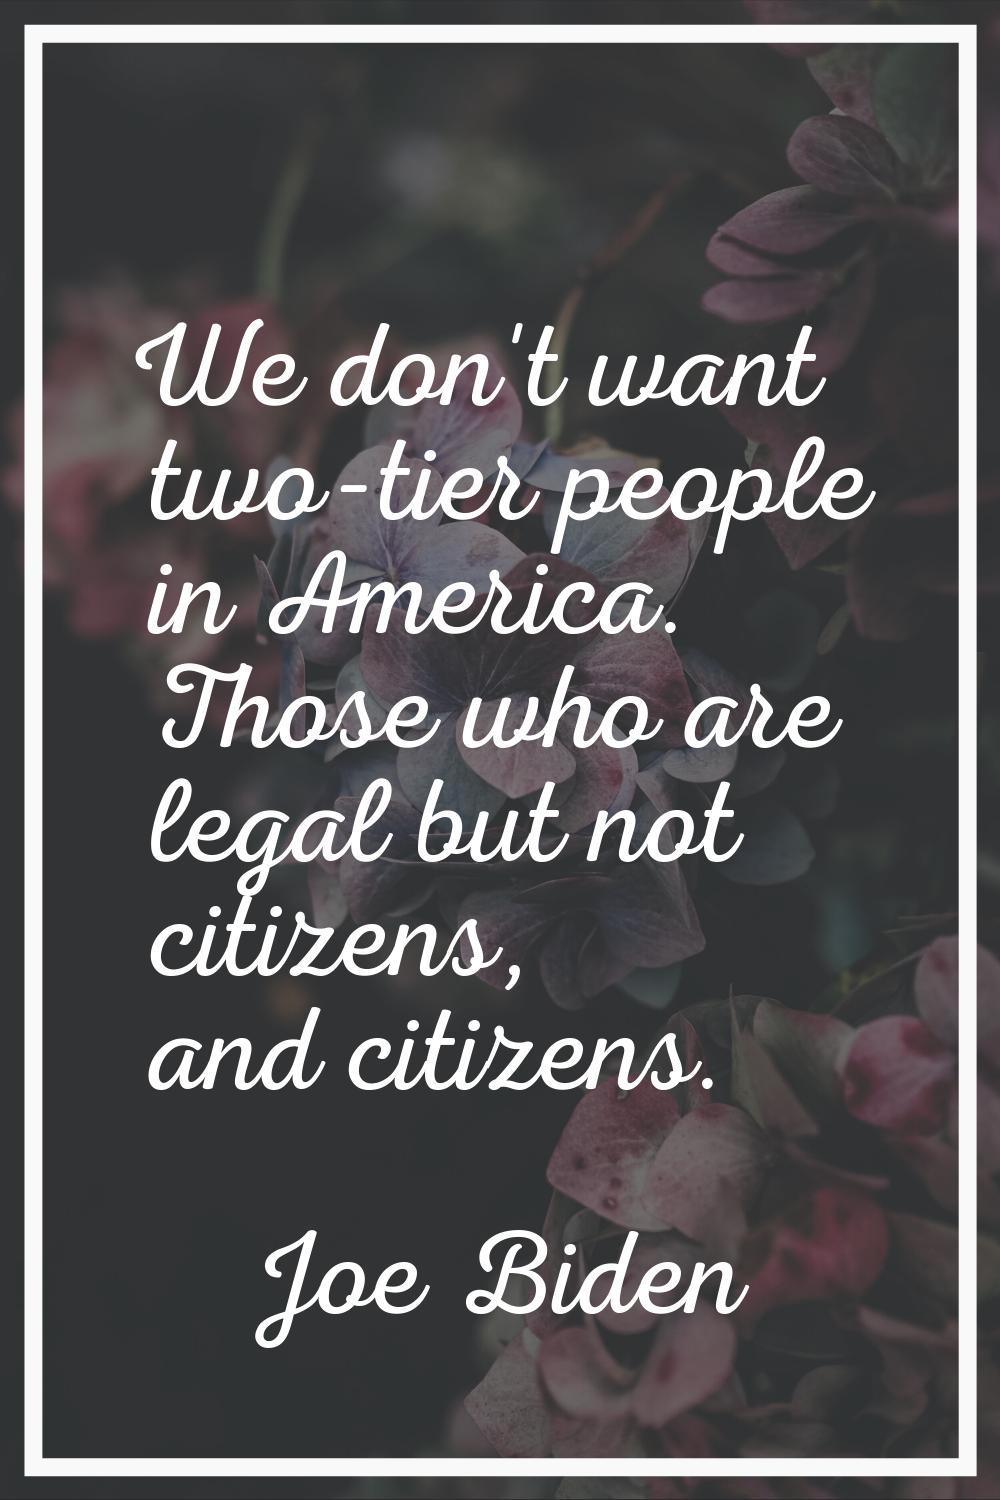 We don't want two-tier people in America. Those who are legal but not citizens, and citizens.